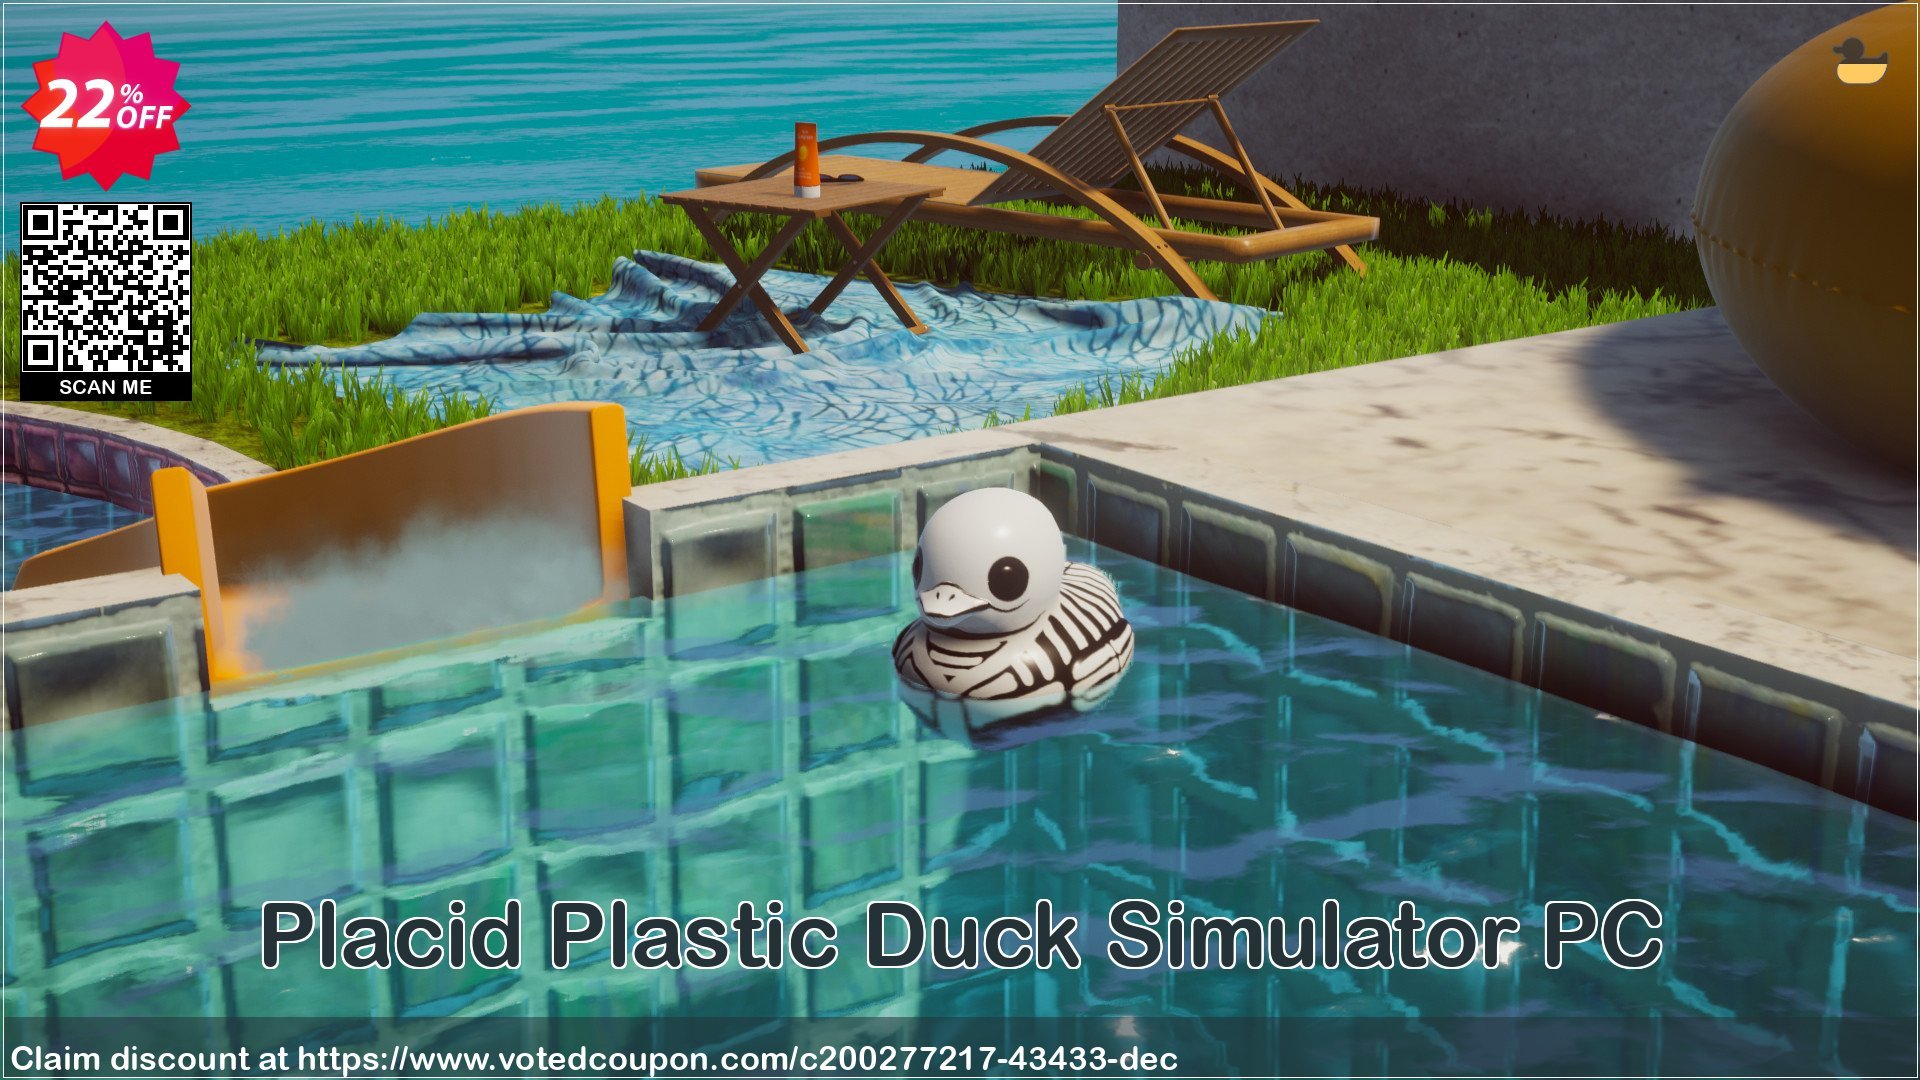 Placid Plastic Duck Simulator PC Coupon Code May 2024, 22% OFF - VotedCoupon